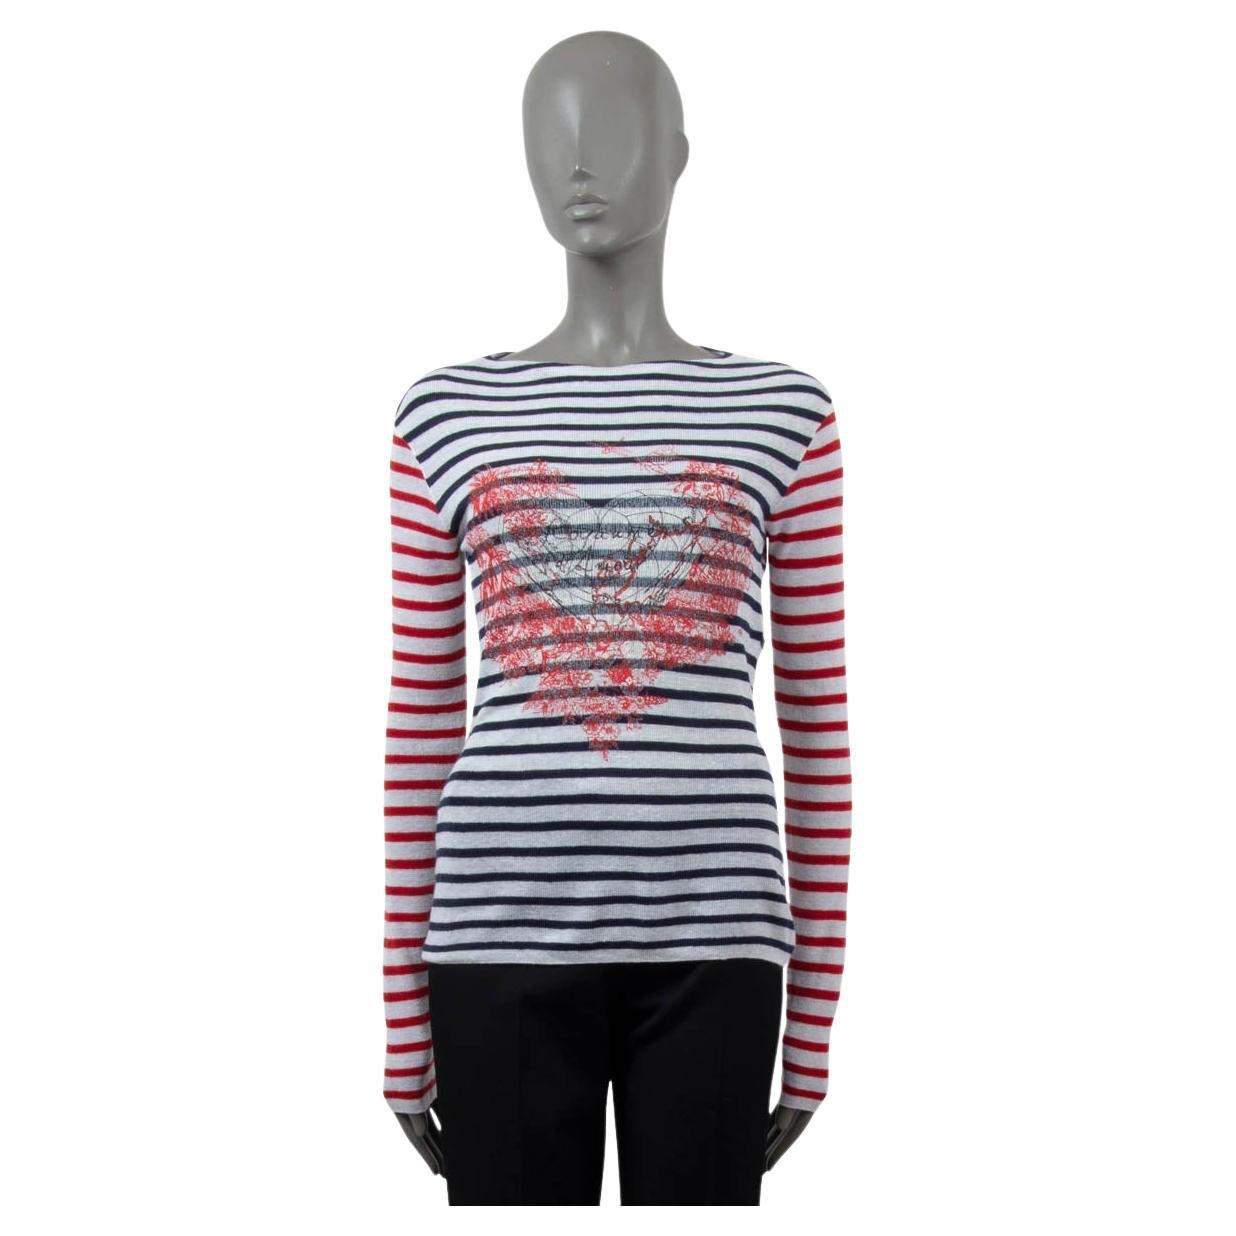 CHRISTIAN DIOR navy red white linen 2021 DIORAMOUR STRIPED Sweater 38 S